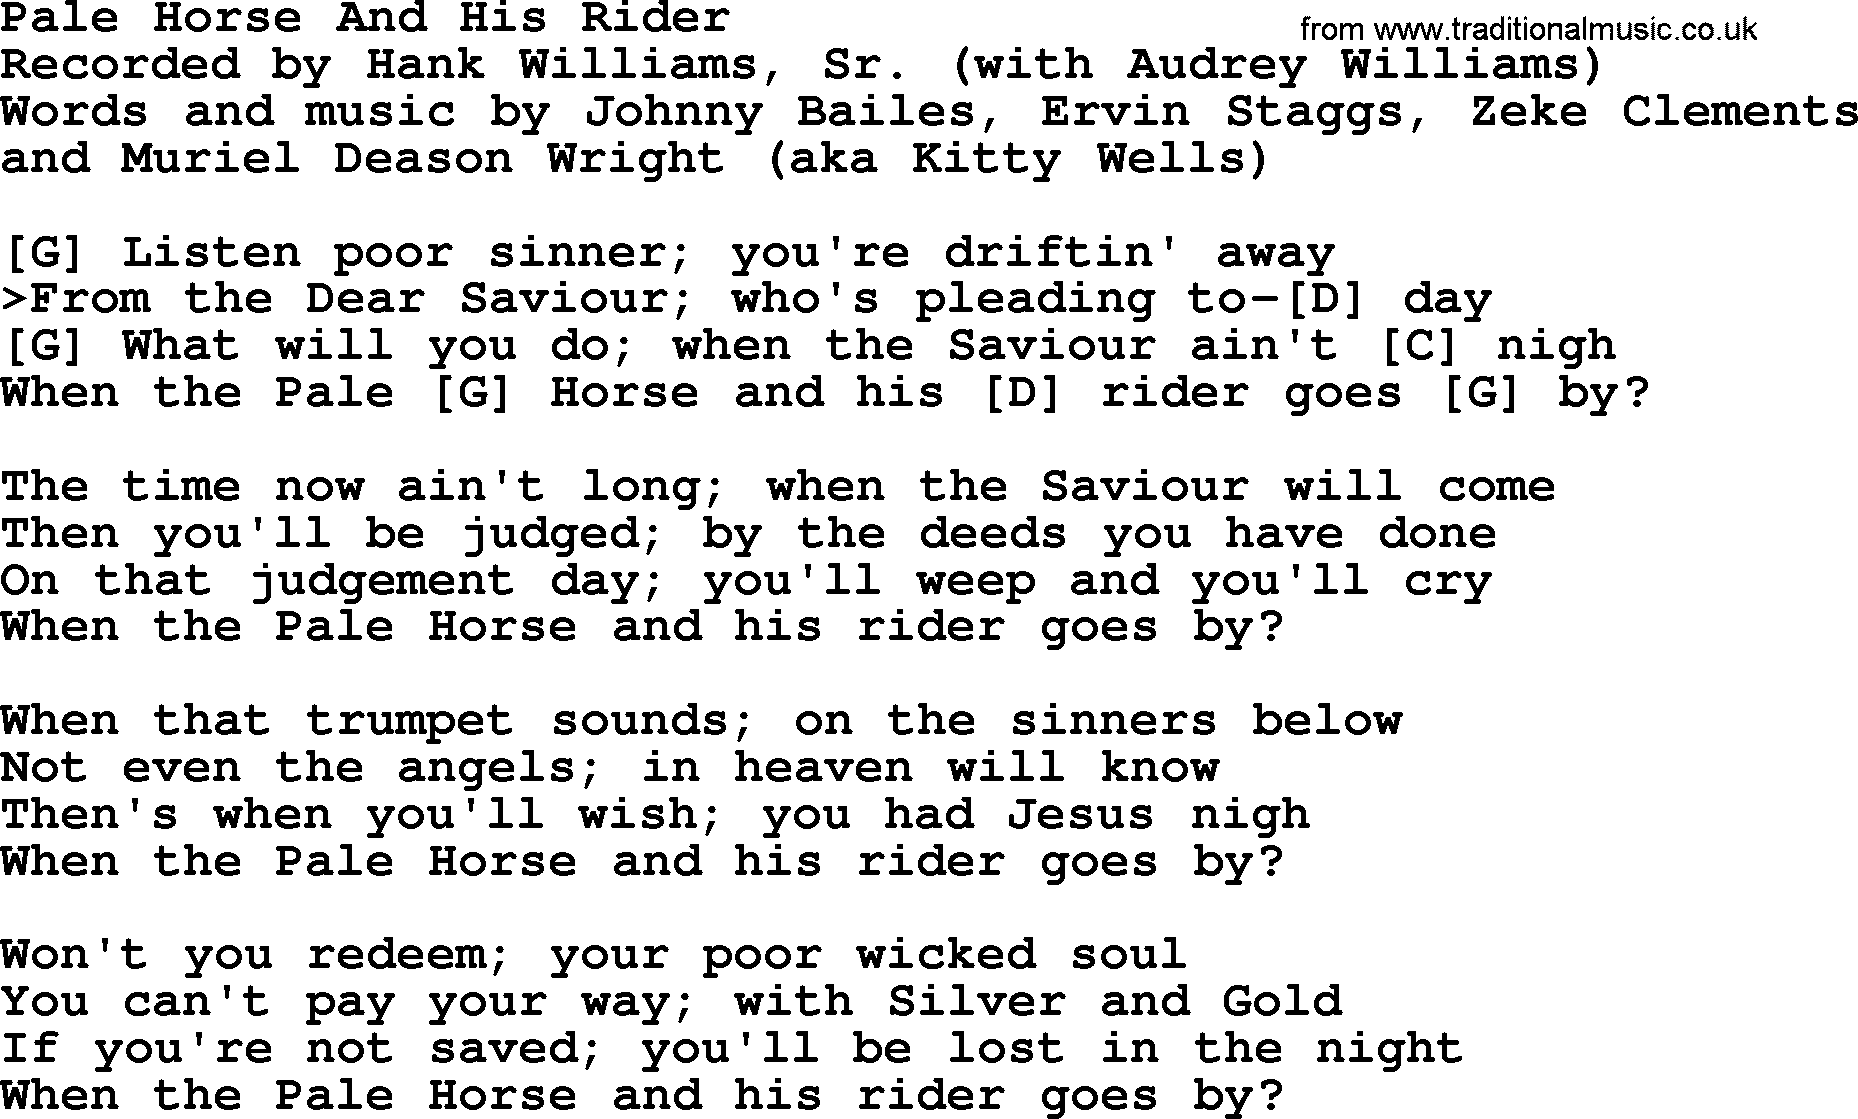 Hank Williams song Pale Horse And His Rider, lyrics and chords